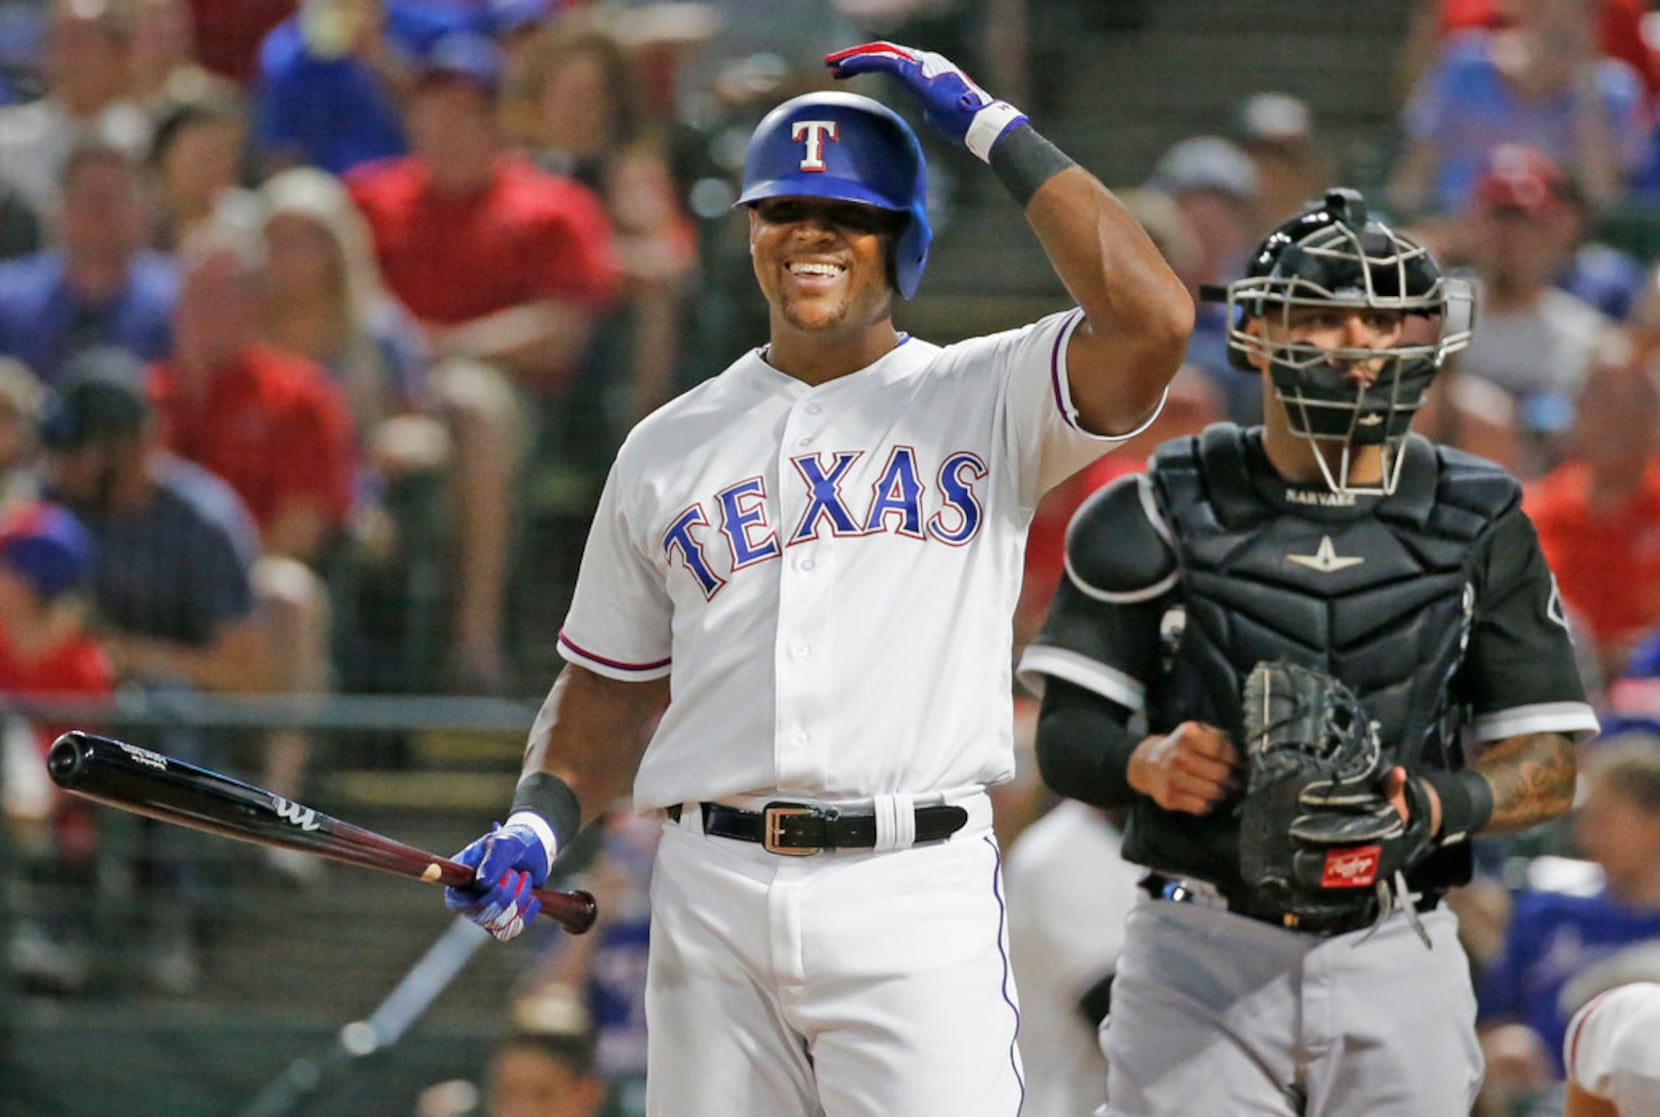 Not in Hall of Fame - 18. Adrian Beltre